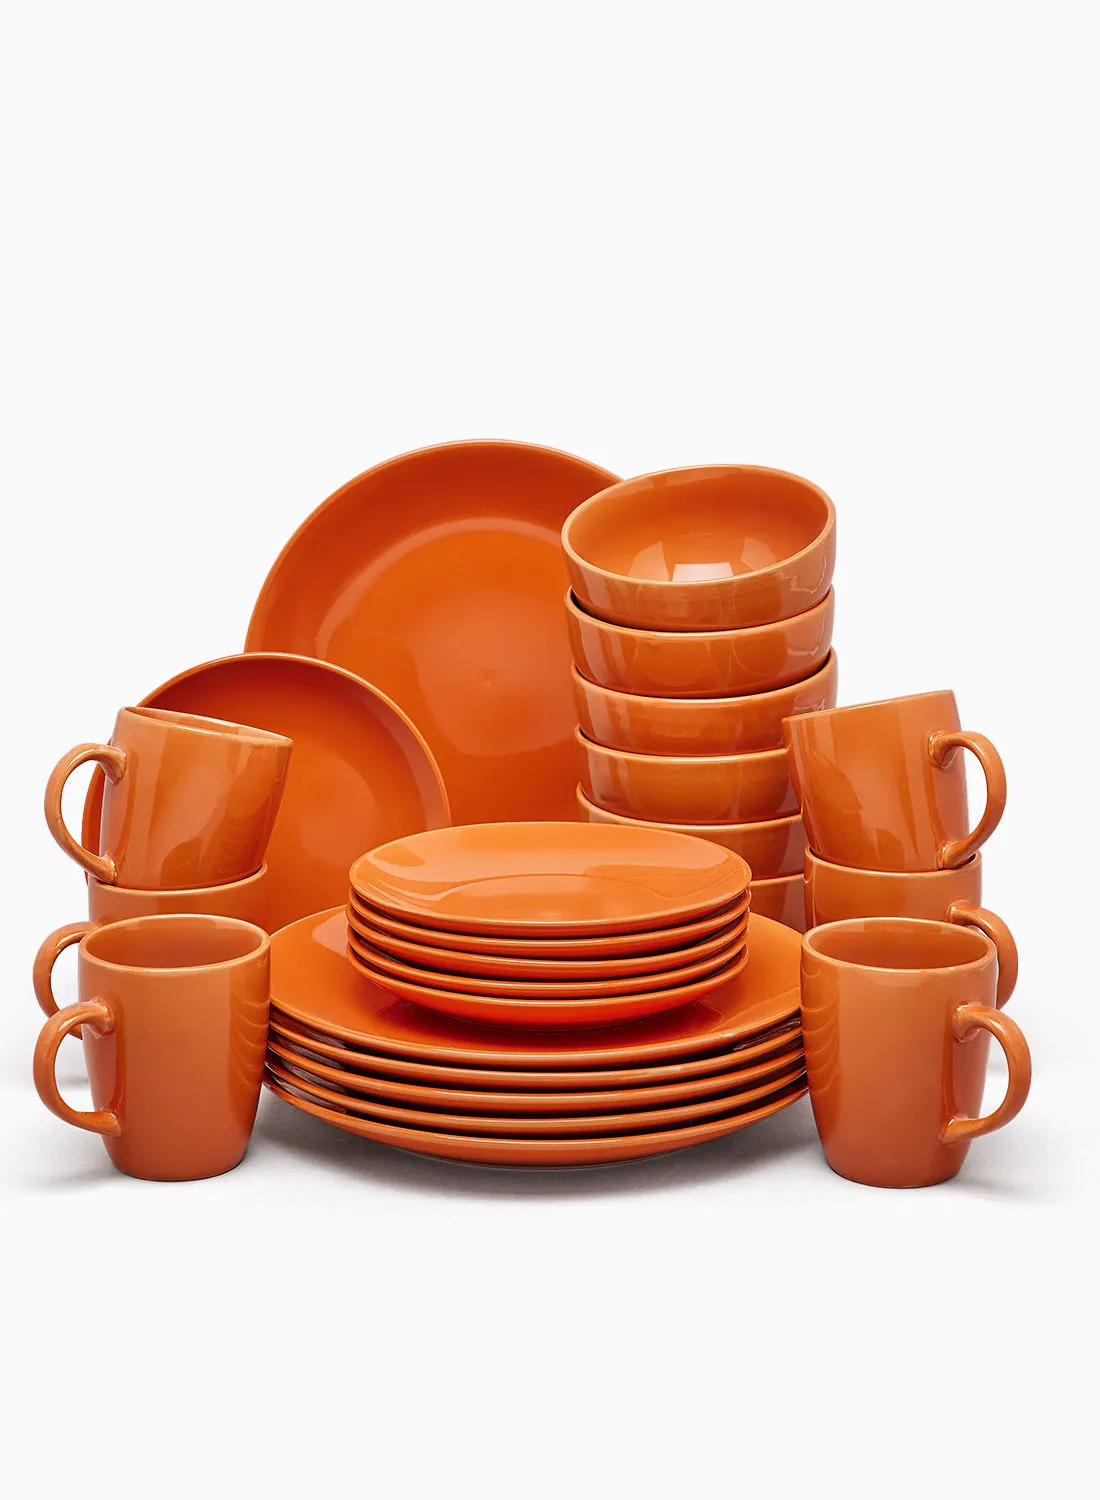 noon east 24 Piece Stoneware Dinner Set - Dishes, Plates - Dinner Plate, Side Plate, Bowl, Mugs - Serves 6 - Rust